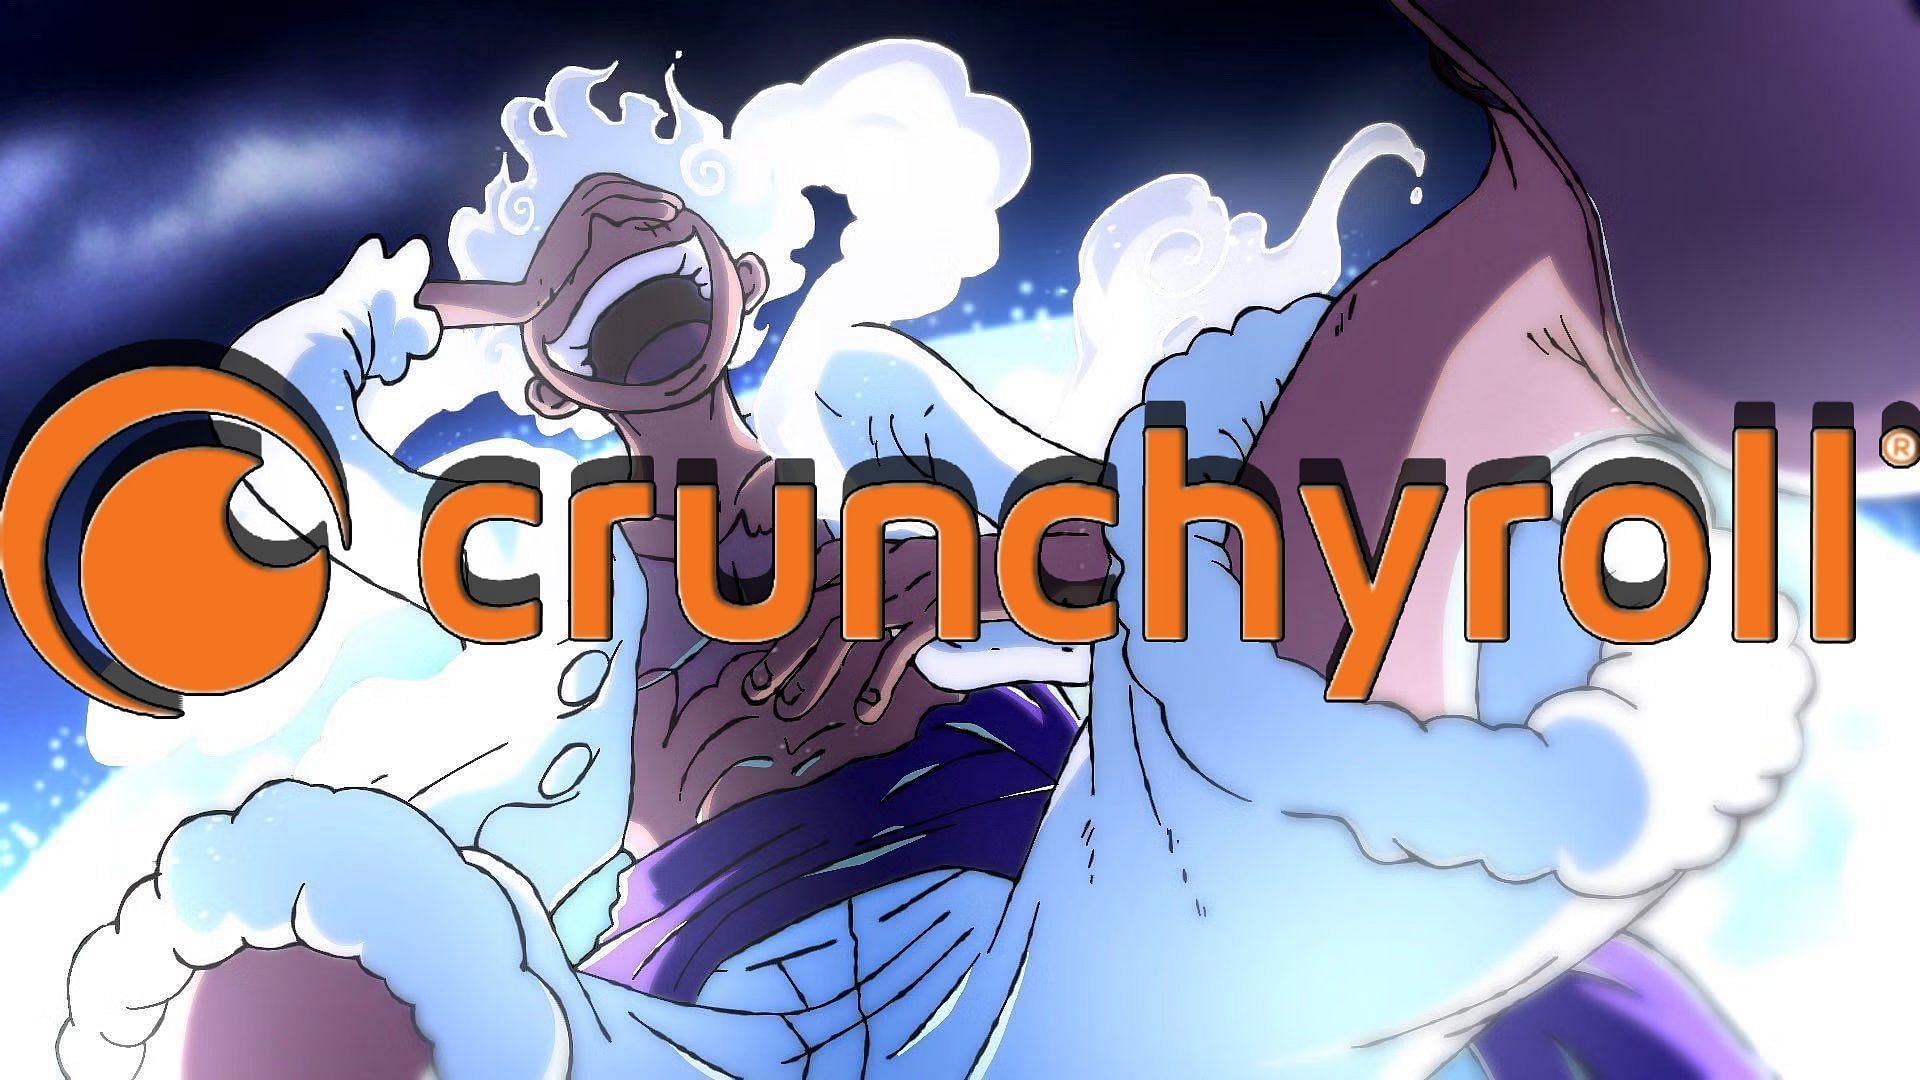 One Piece Special Episode 4 Release Date & Time on Crunchyroll